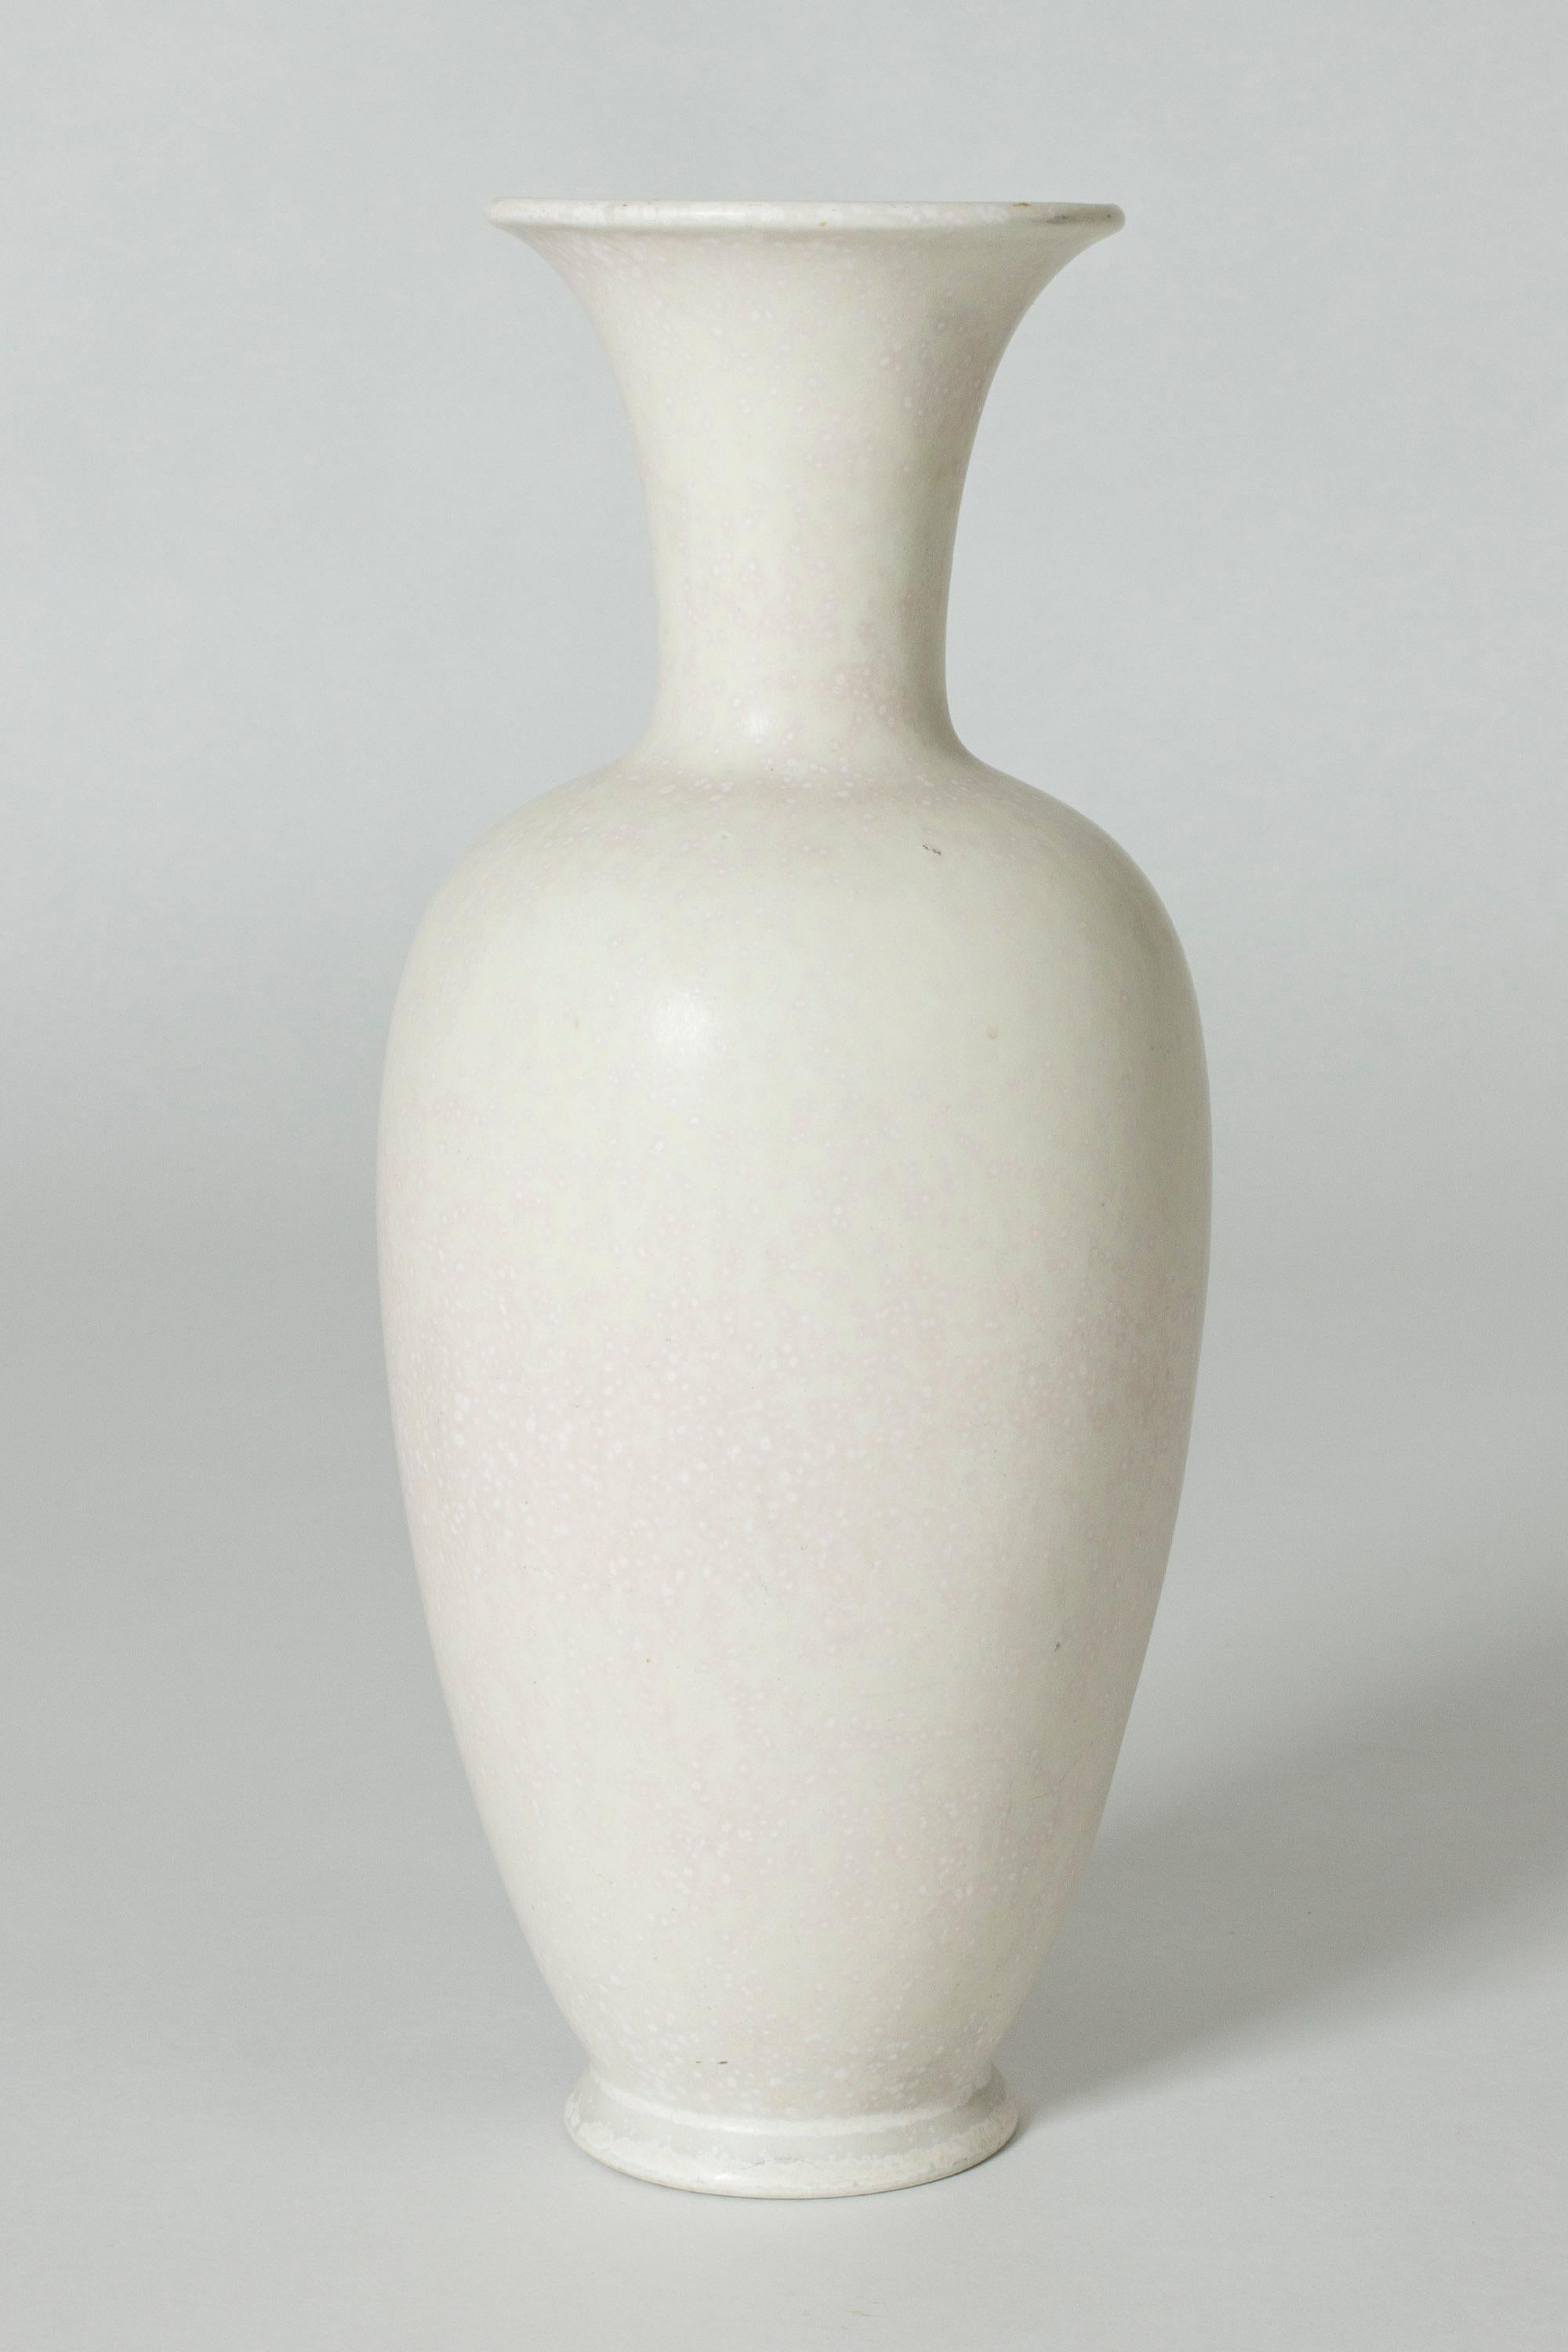 Beautiful stoneware vase by Gunnar Nylund, curvesome with a wide mouth. White glaze with subtle “Mimosa” flecks.